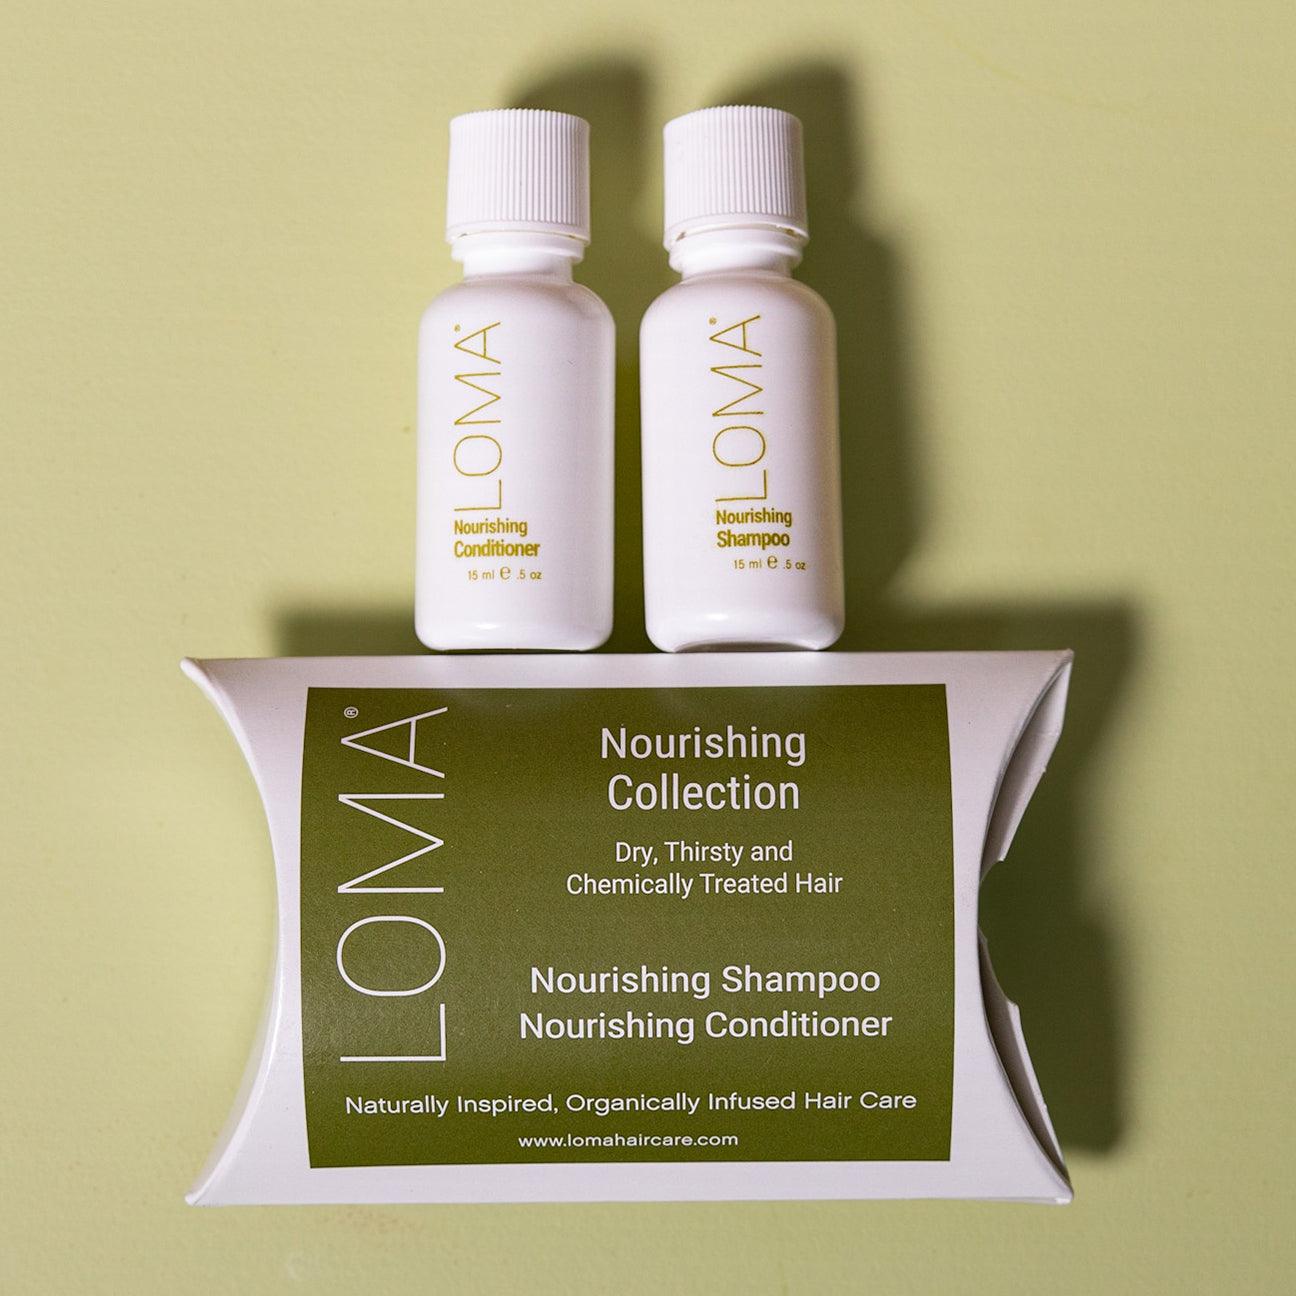 Pick Your Free Sample: Four Free Hair Care Samples